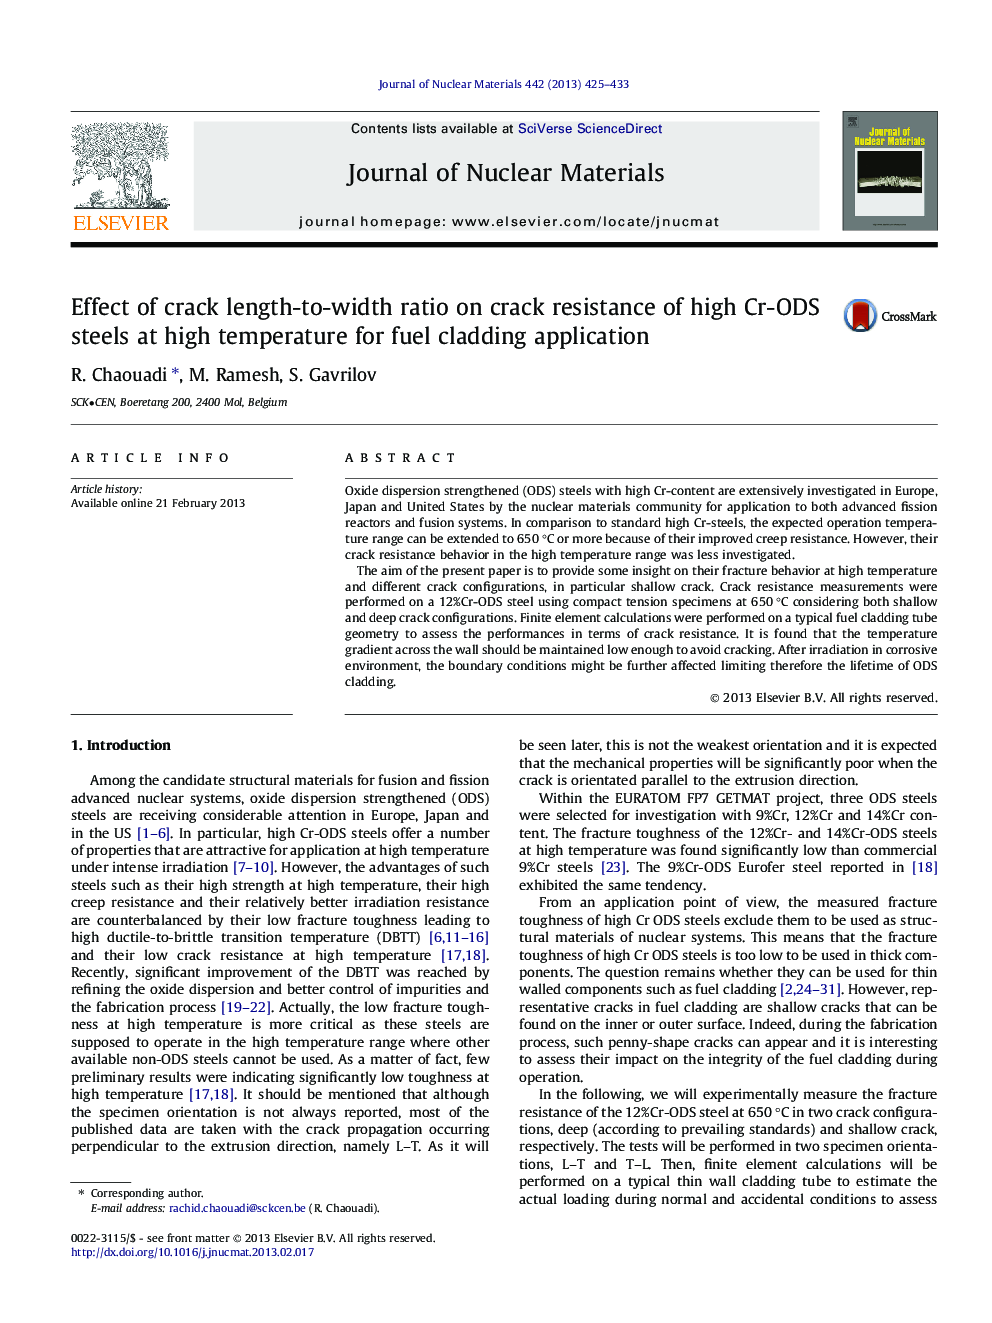 Effect of crack length-to-width ratio on crack resistance of high Cr-ODS steels at high temperature for fuel cladding application